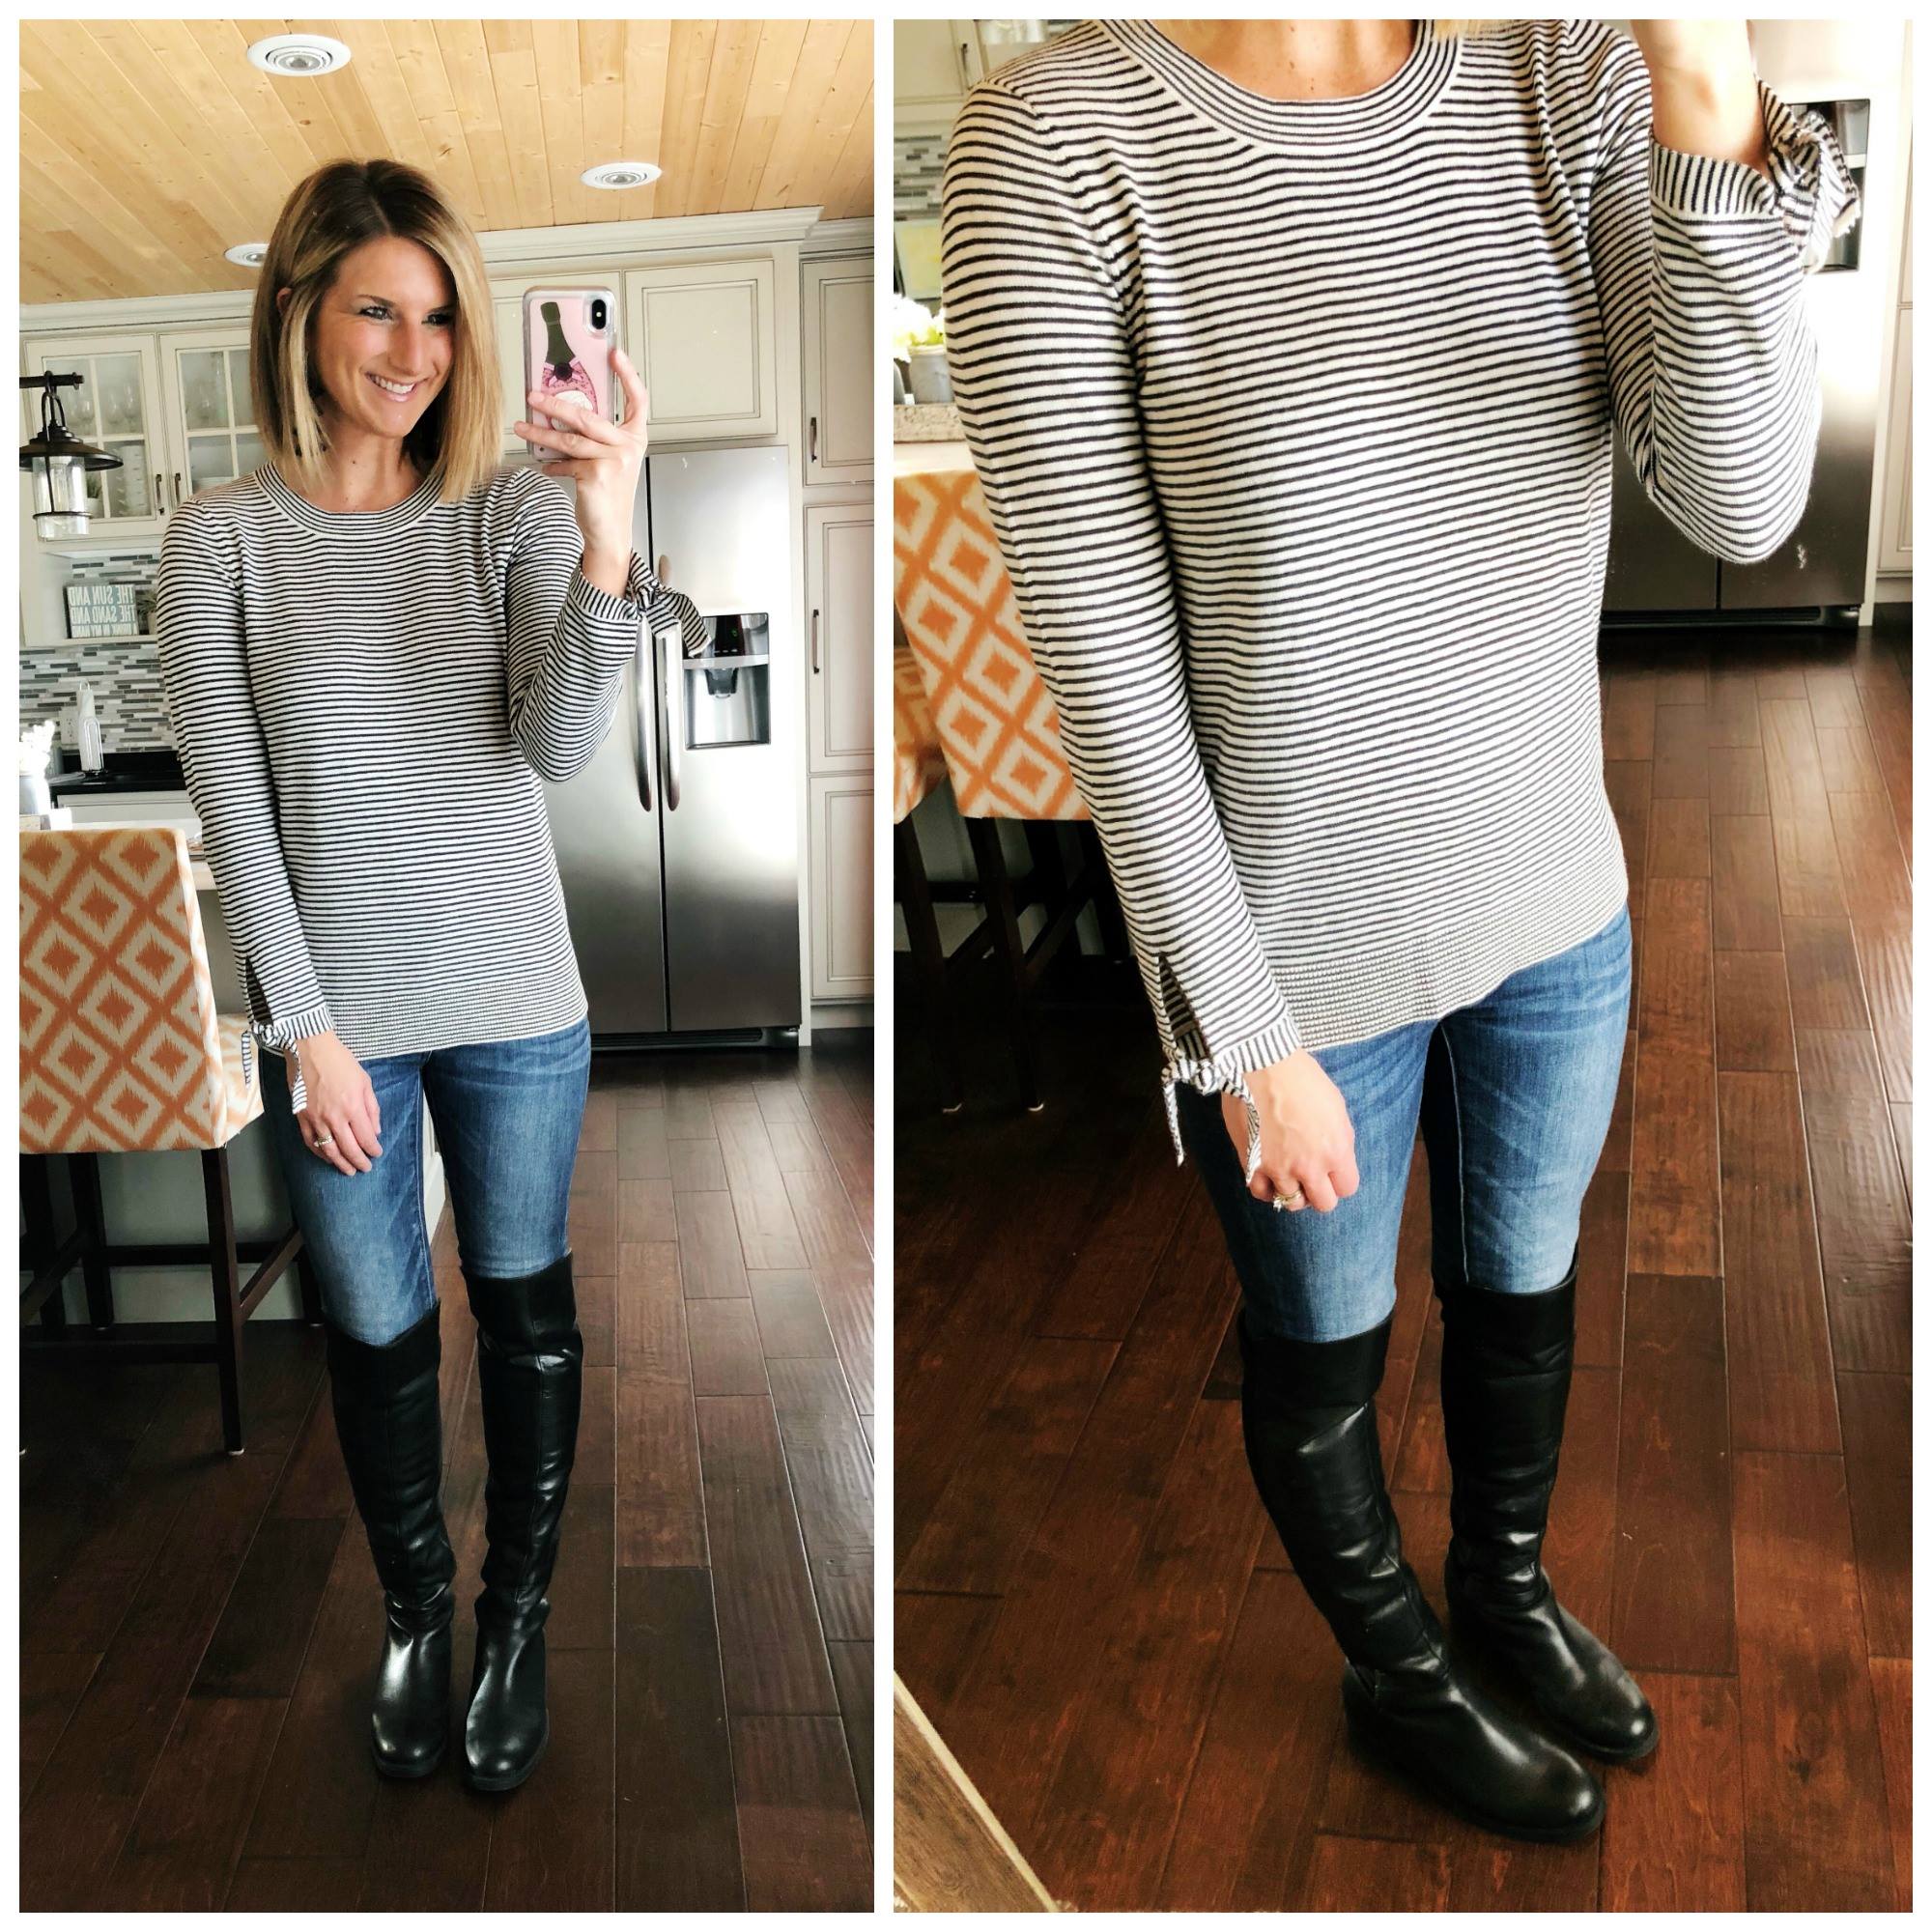 Spring Outfit // Winter to Spring Outfit // Black and White Striped Sweater + Jegging + Knee High Boots